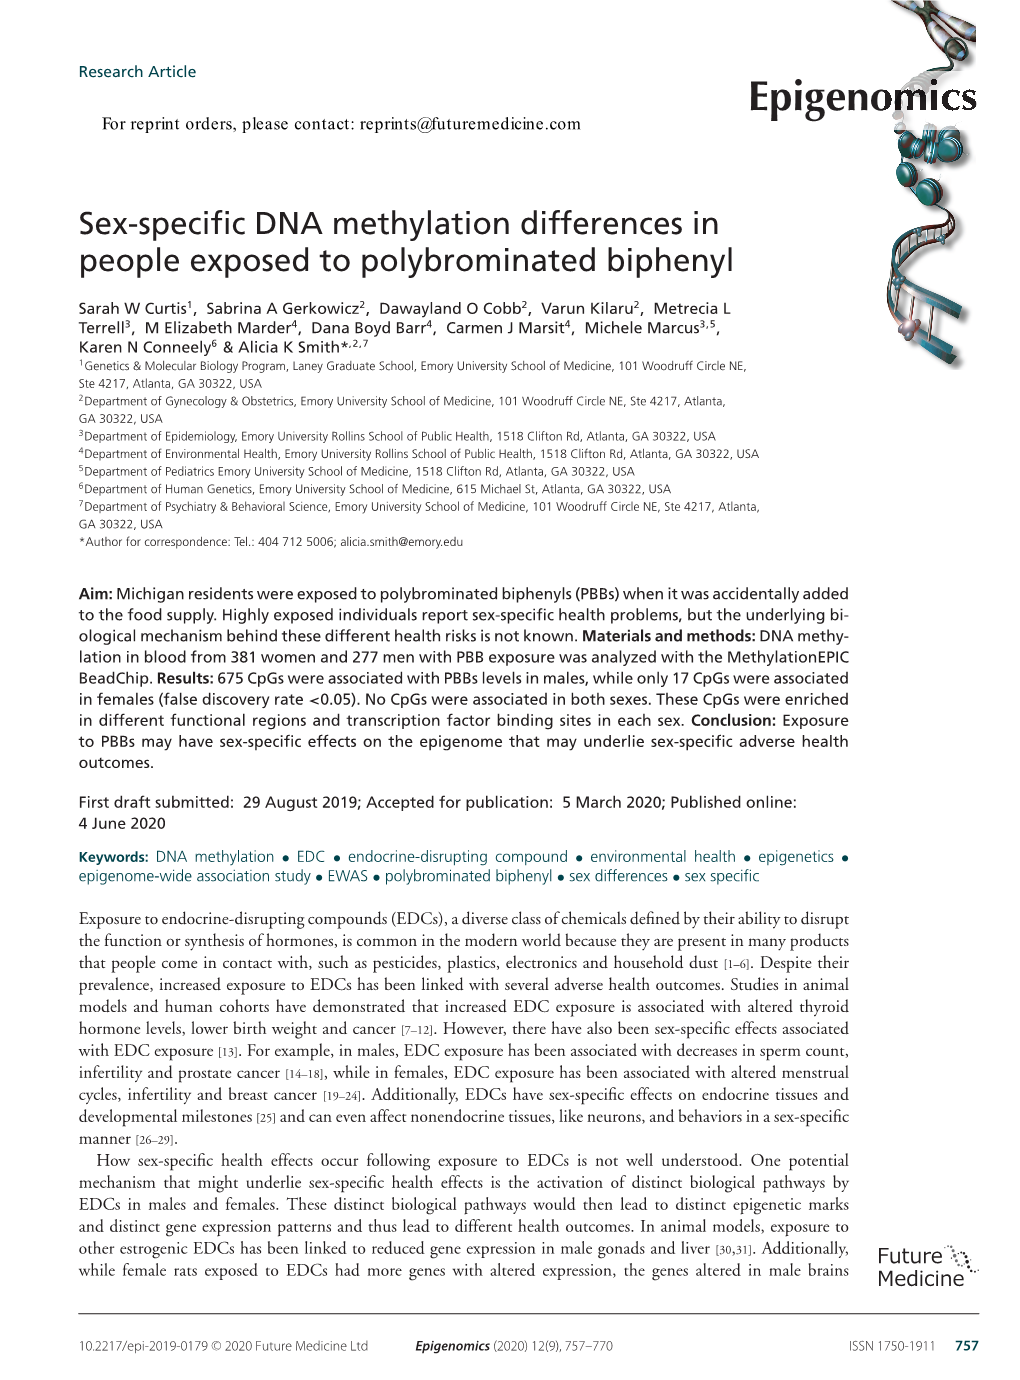 Sex-Specific DNA Methylation Differences in People Exposed to Polybrominated Biphenyl